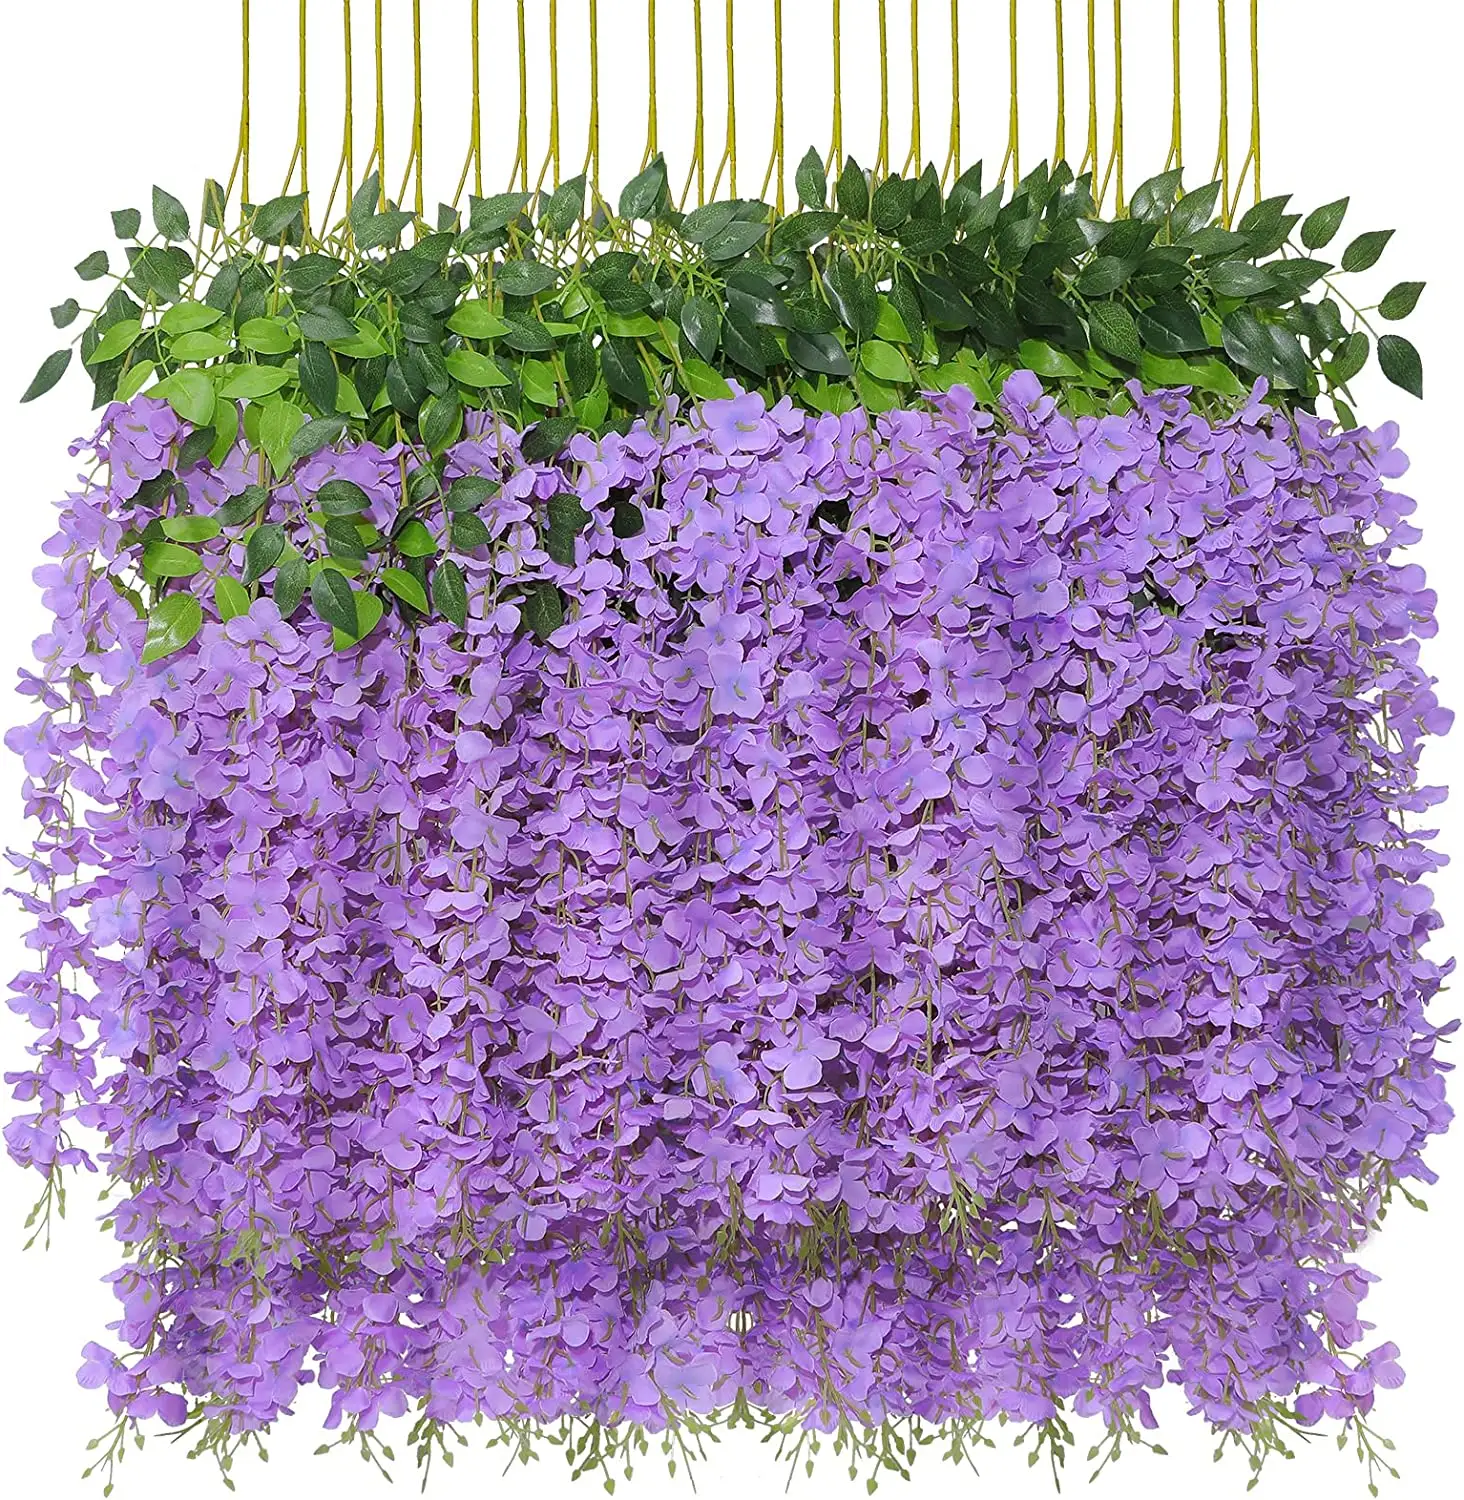 Wholesale 12pcs Wisteria Flowers Artificial Flowers White Wisteria Hanging Flowers Vine Garland for Wedding Decoration